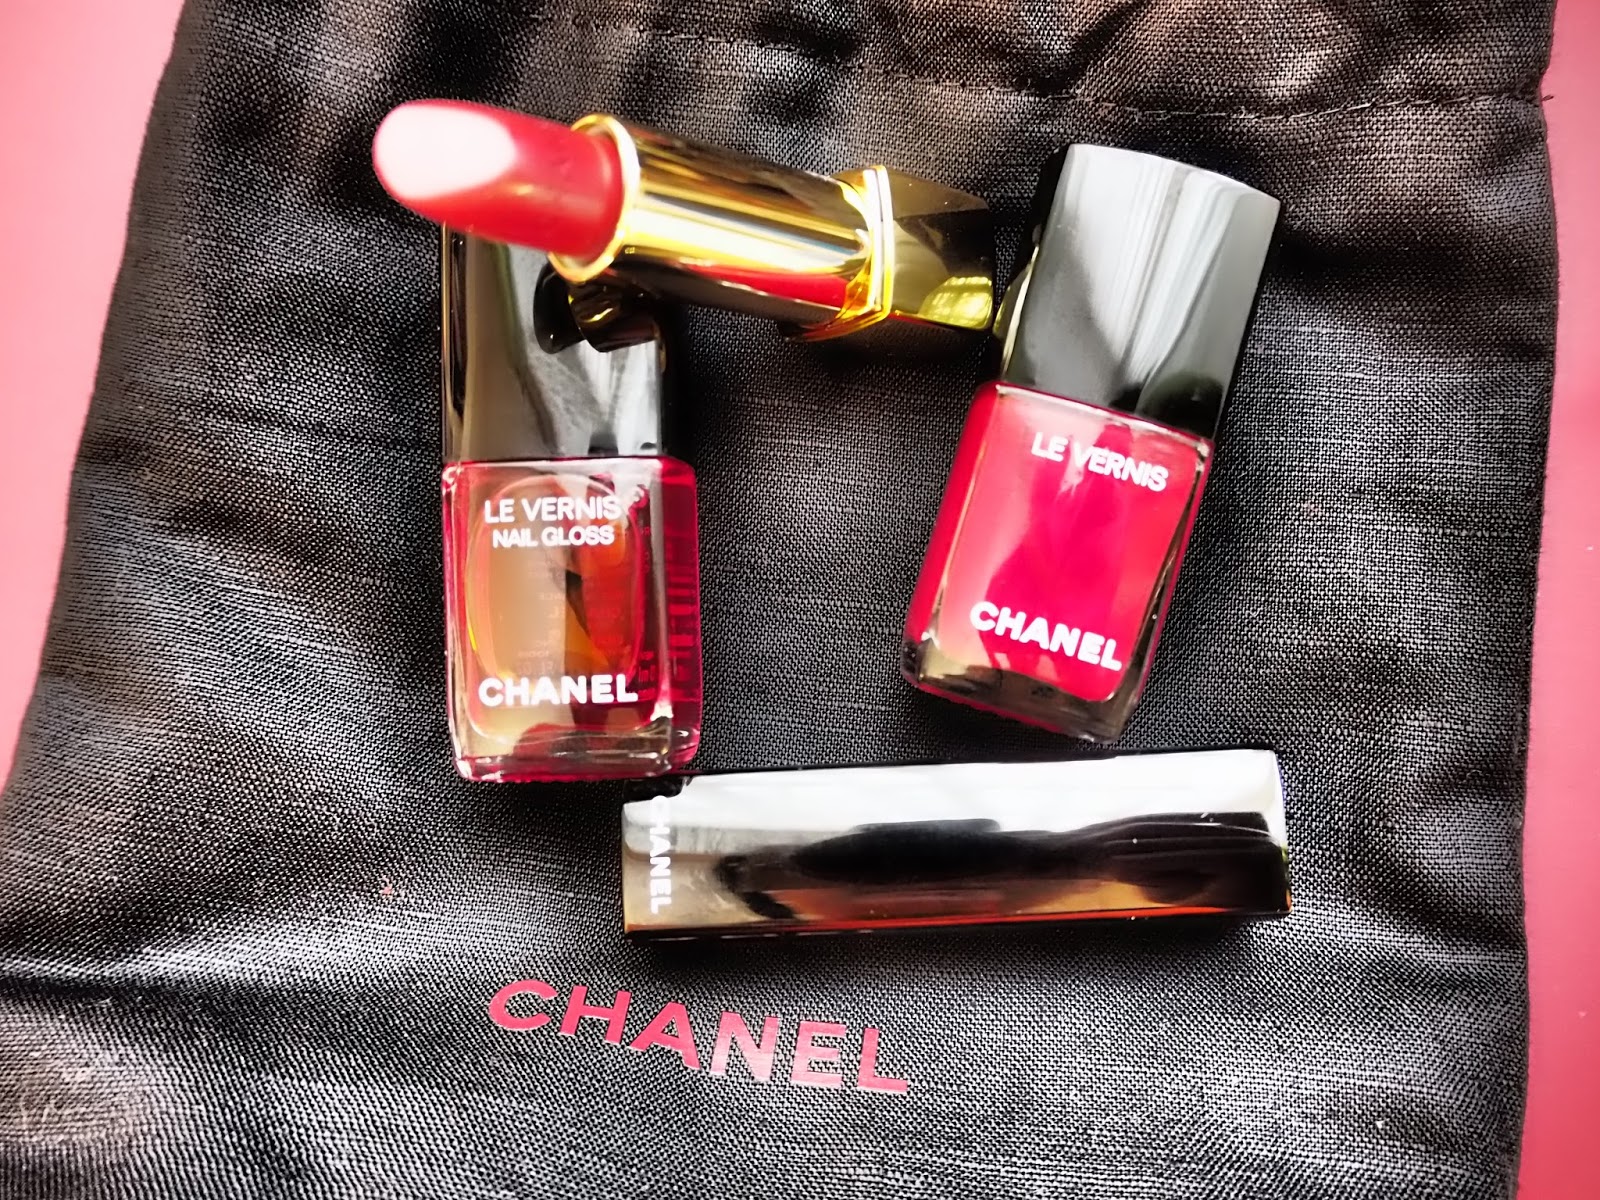 Chanel Le Rouge: Lucia Pica's Debut Collection